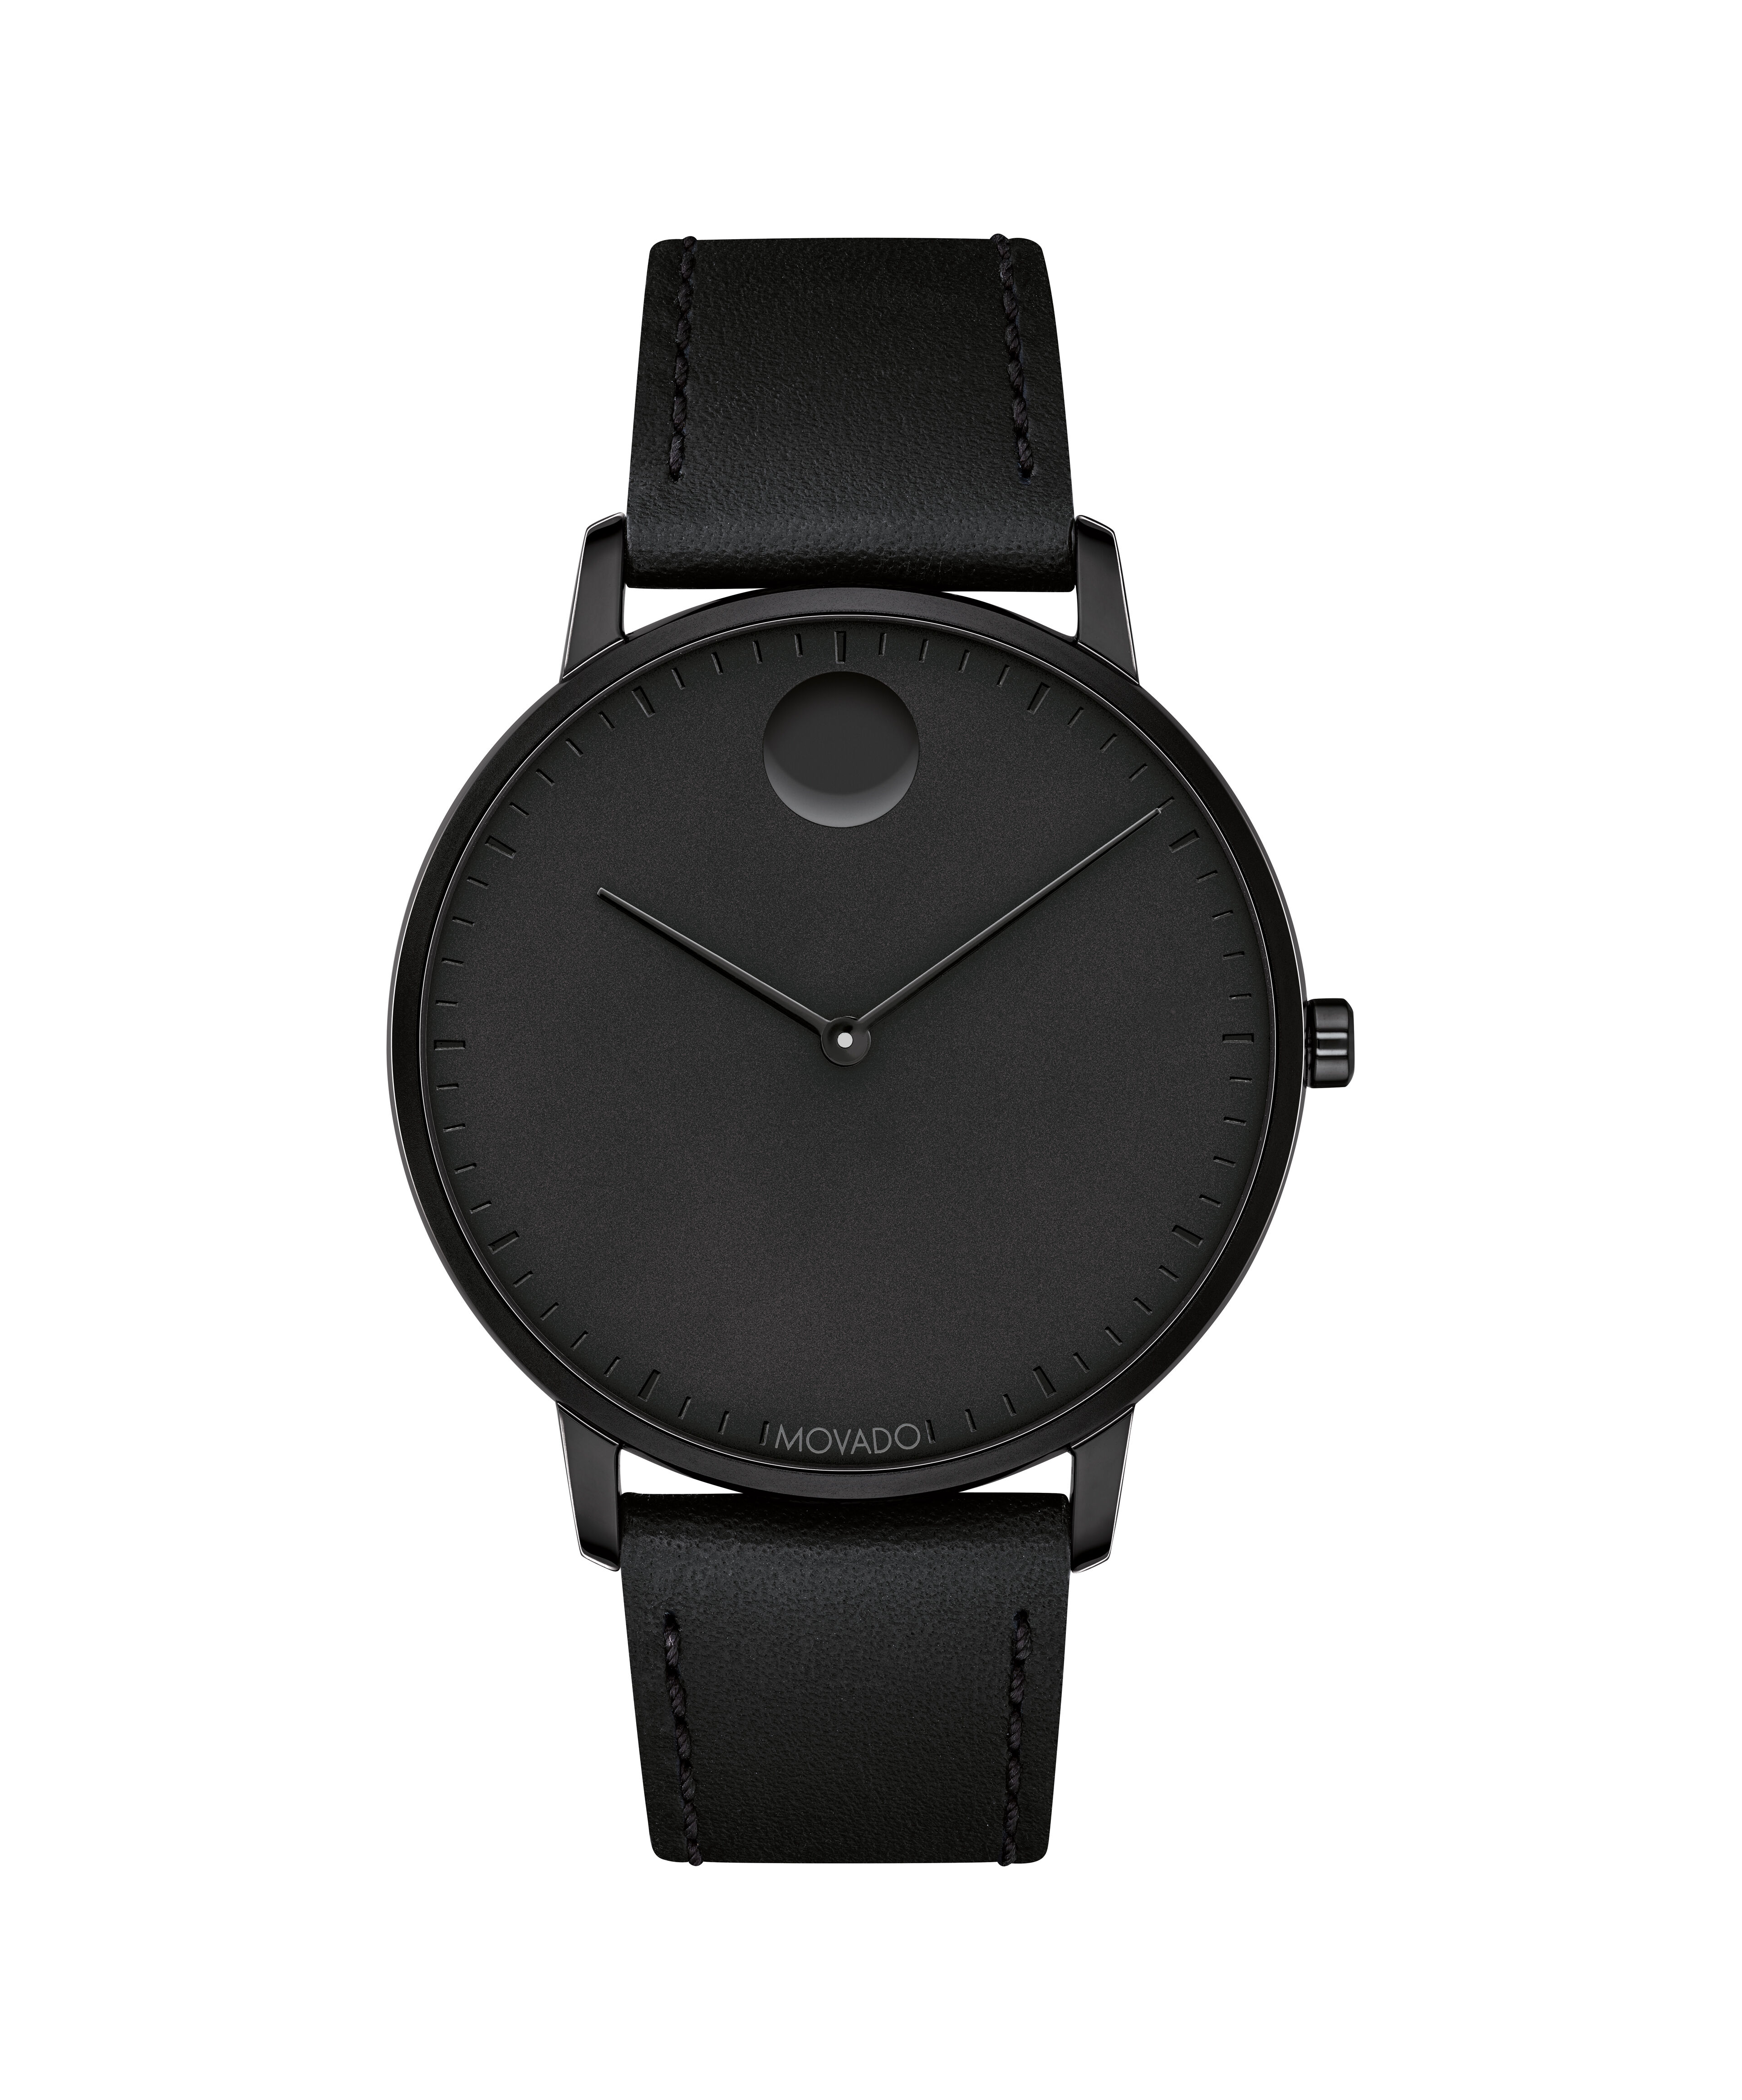 Replica Movado Watches From China